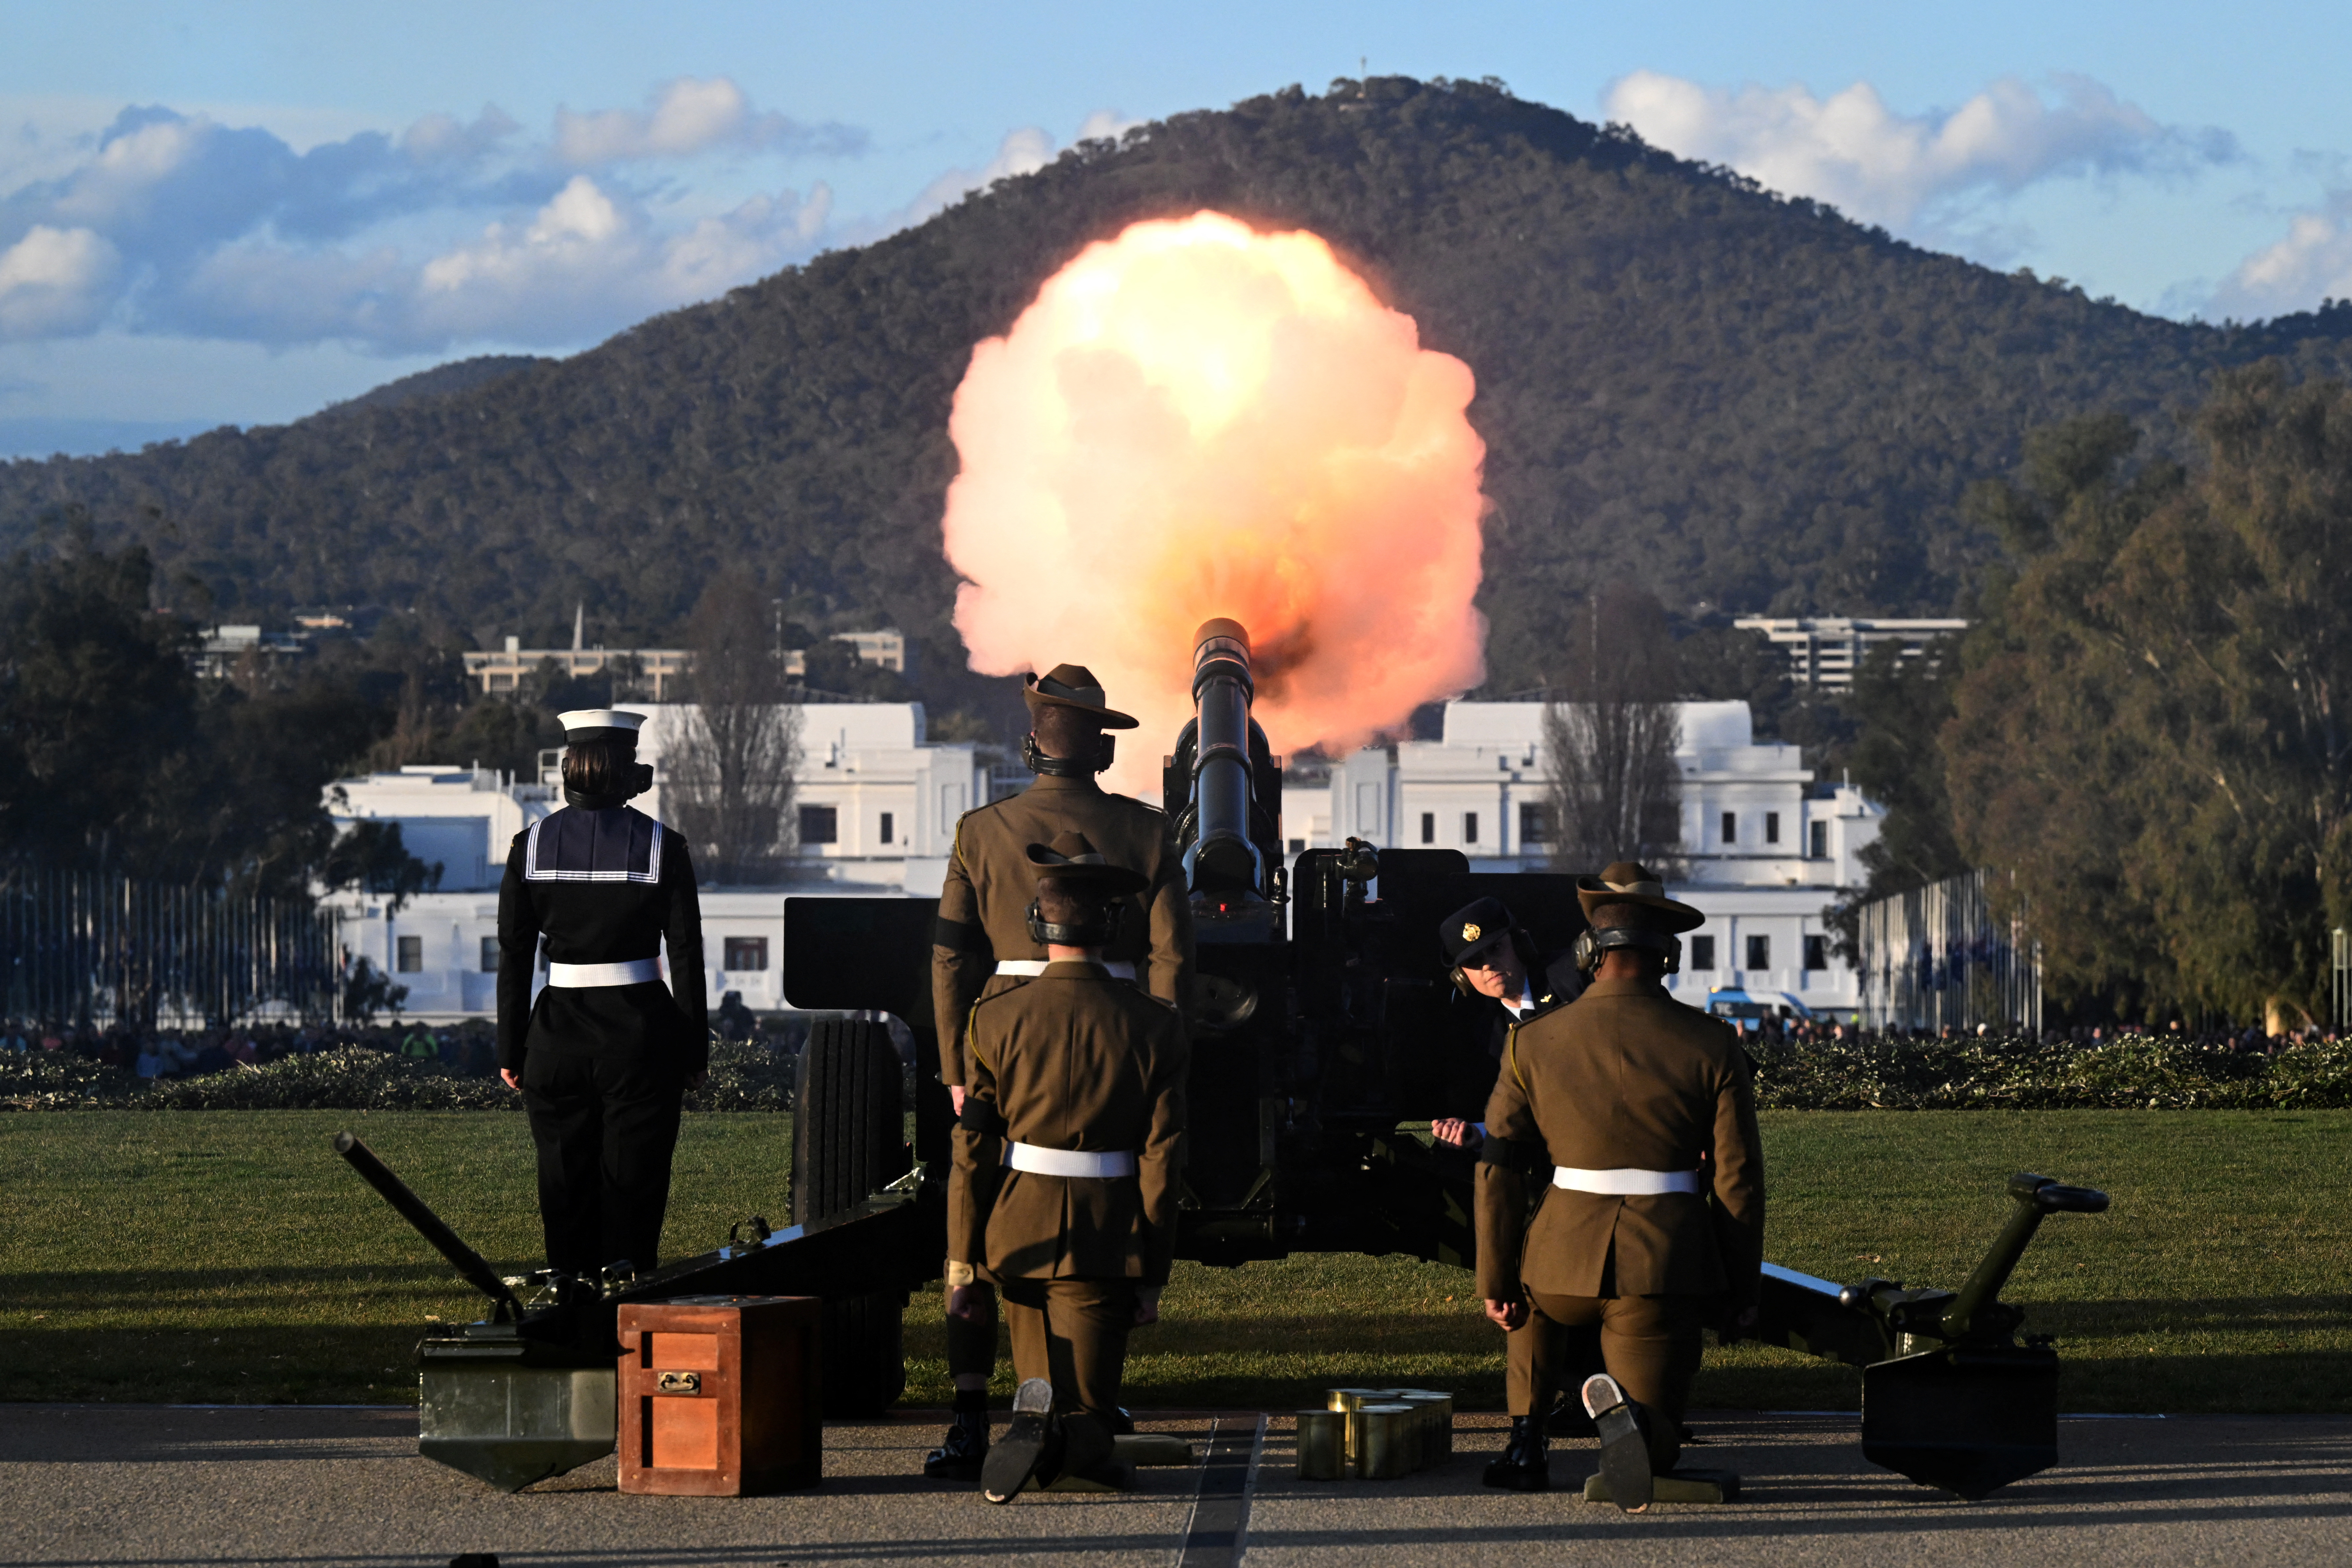 A 96-gun salute for Queen Elizabeth in front of Parliament House in Canberra